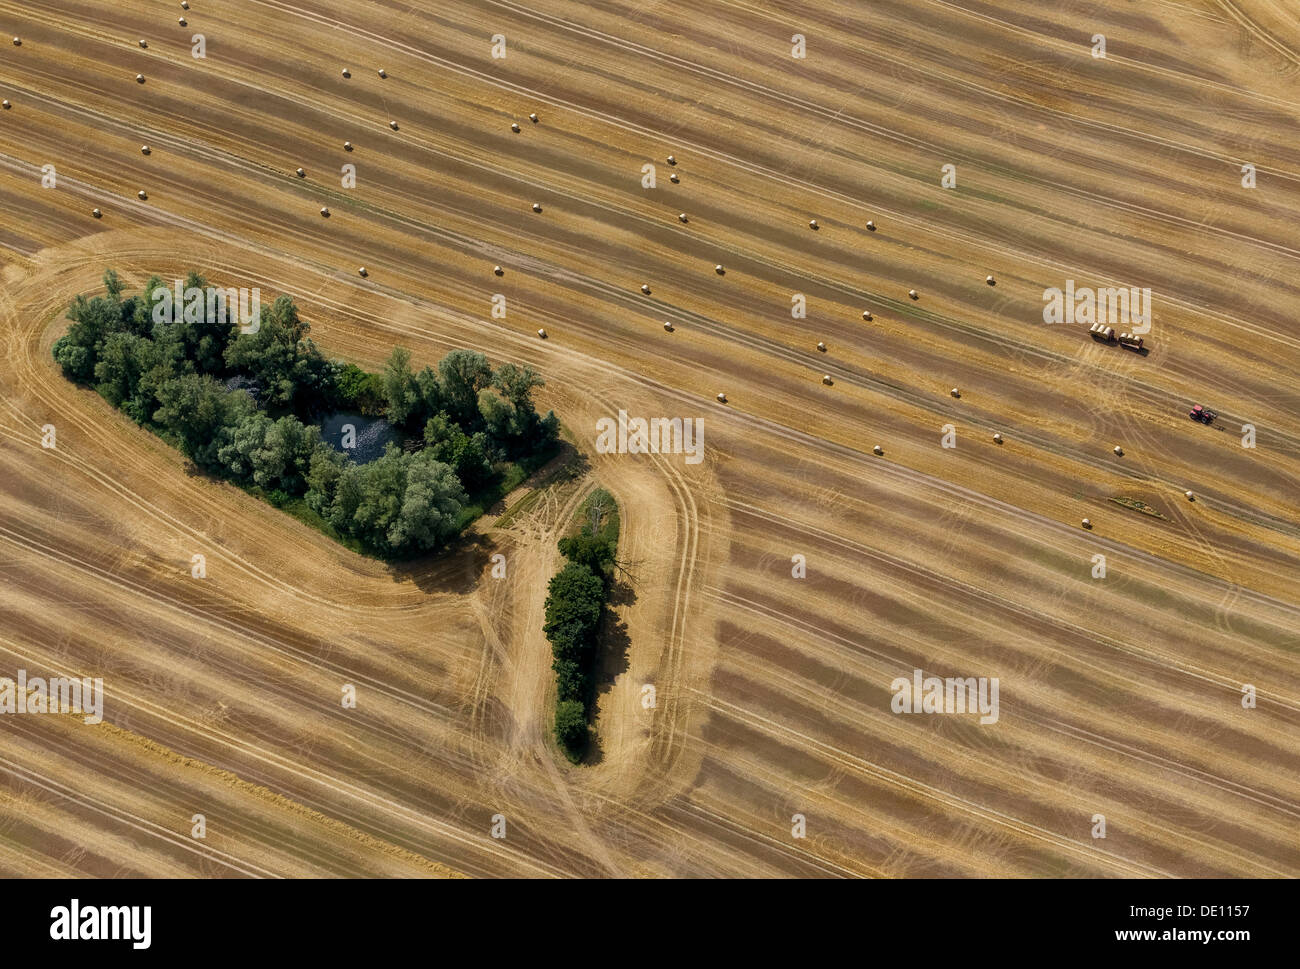 Aerial view, harvested corn field with forest patches, tractor collecting straw bales, moraine Stock Photo